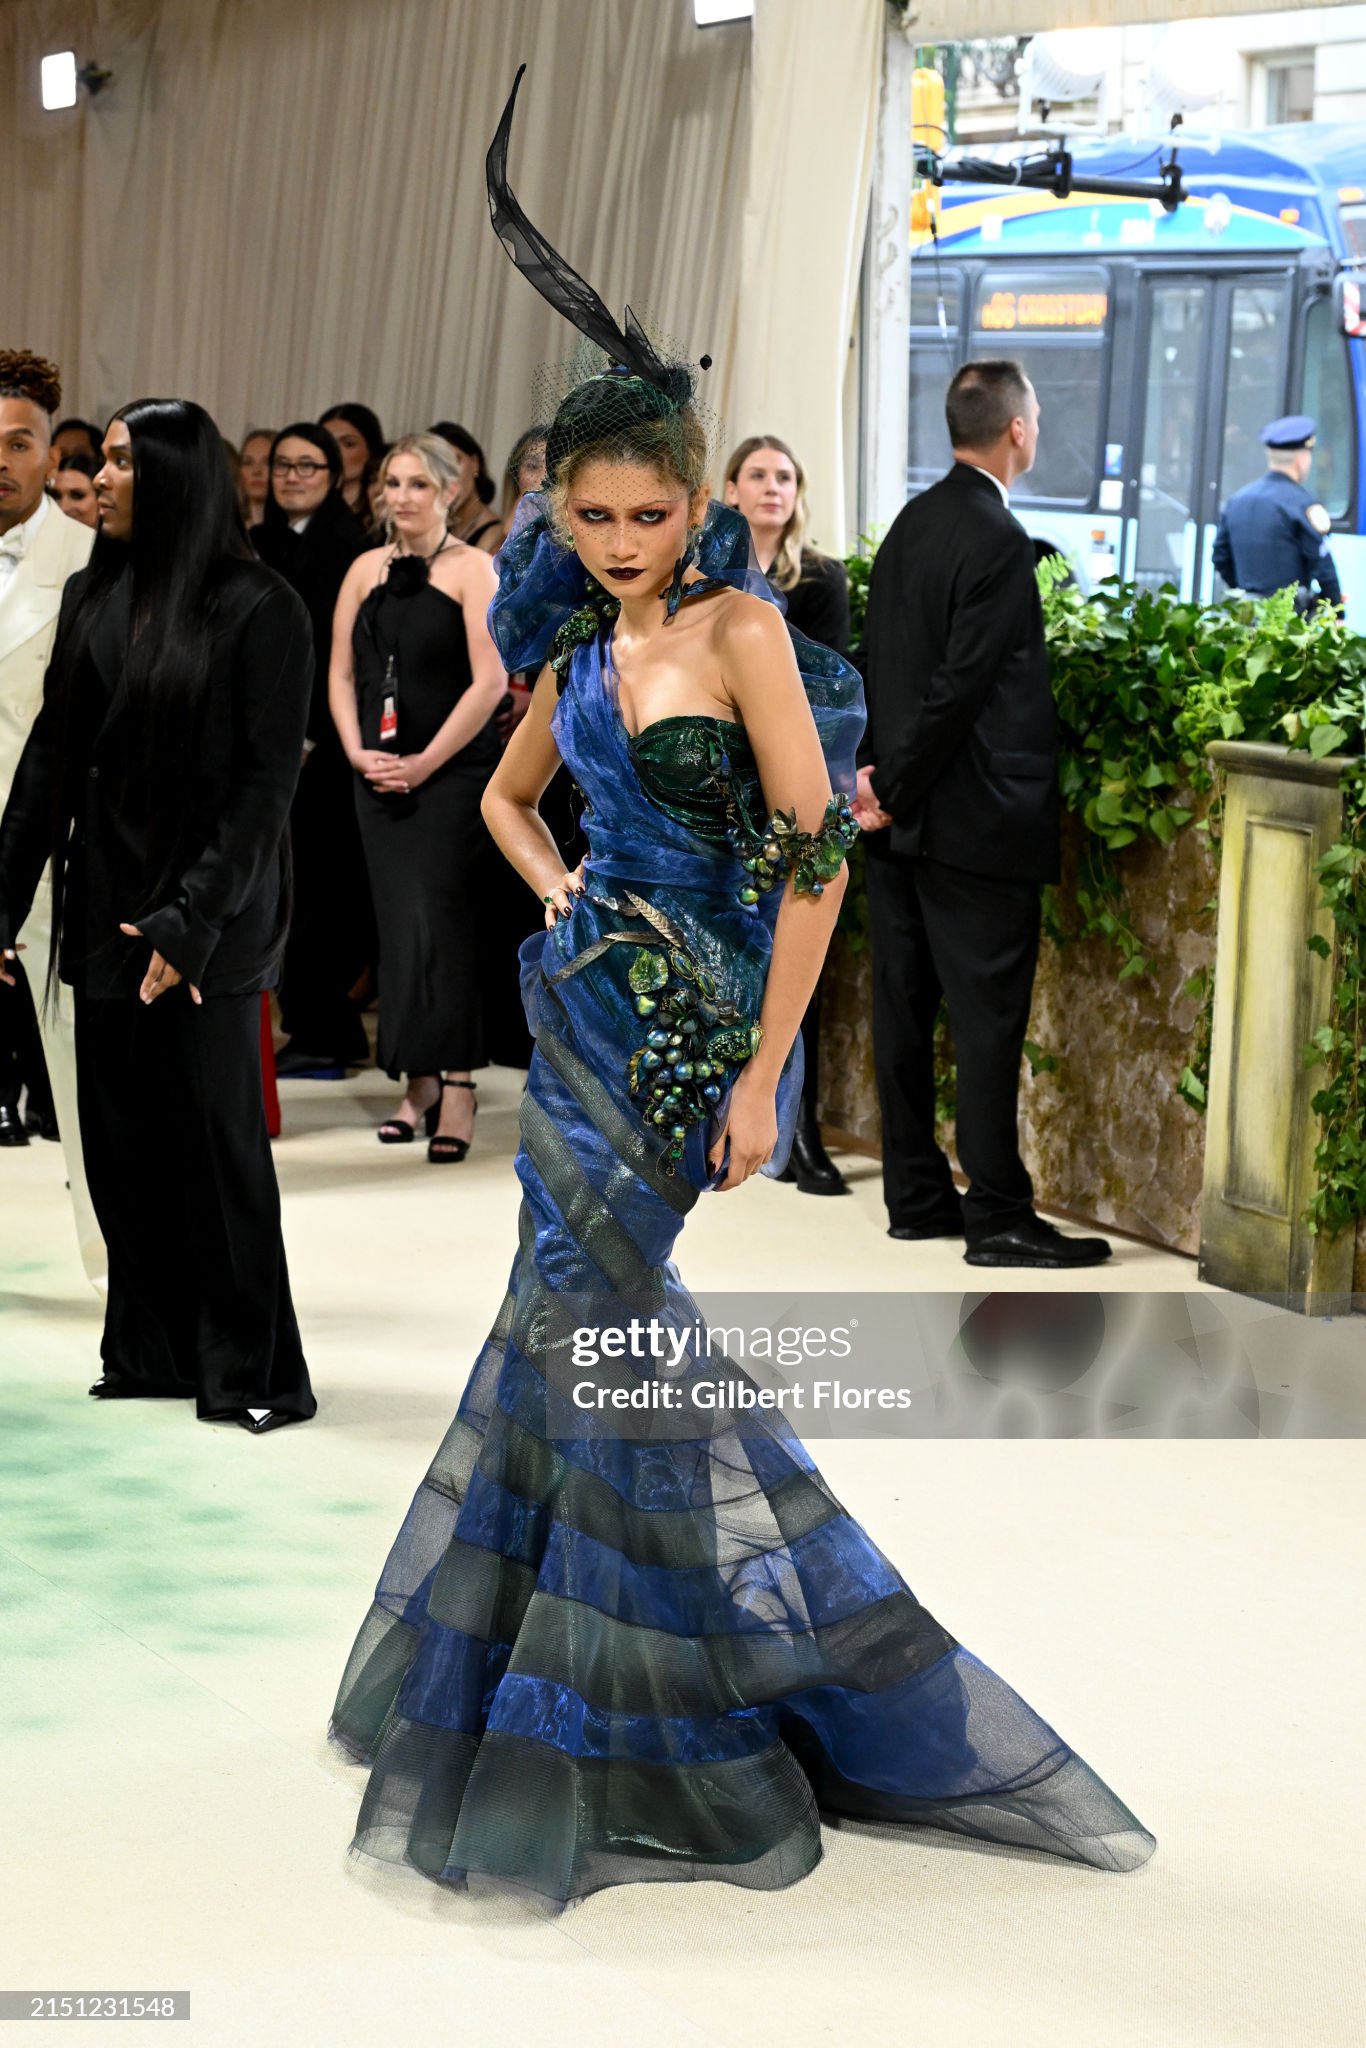 gettyimages-2151231548-2048x2048.jpg